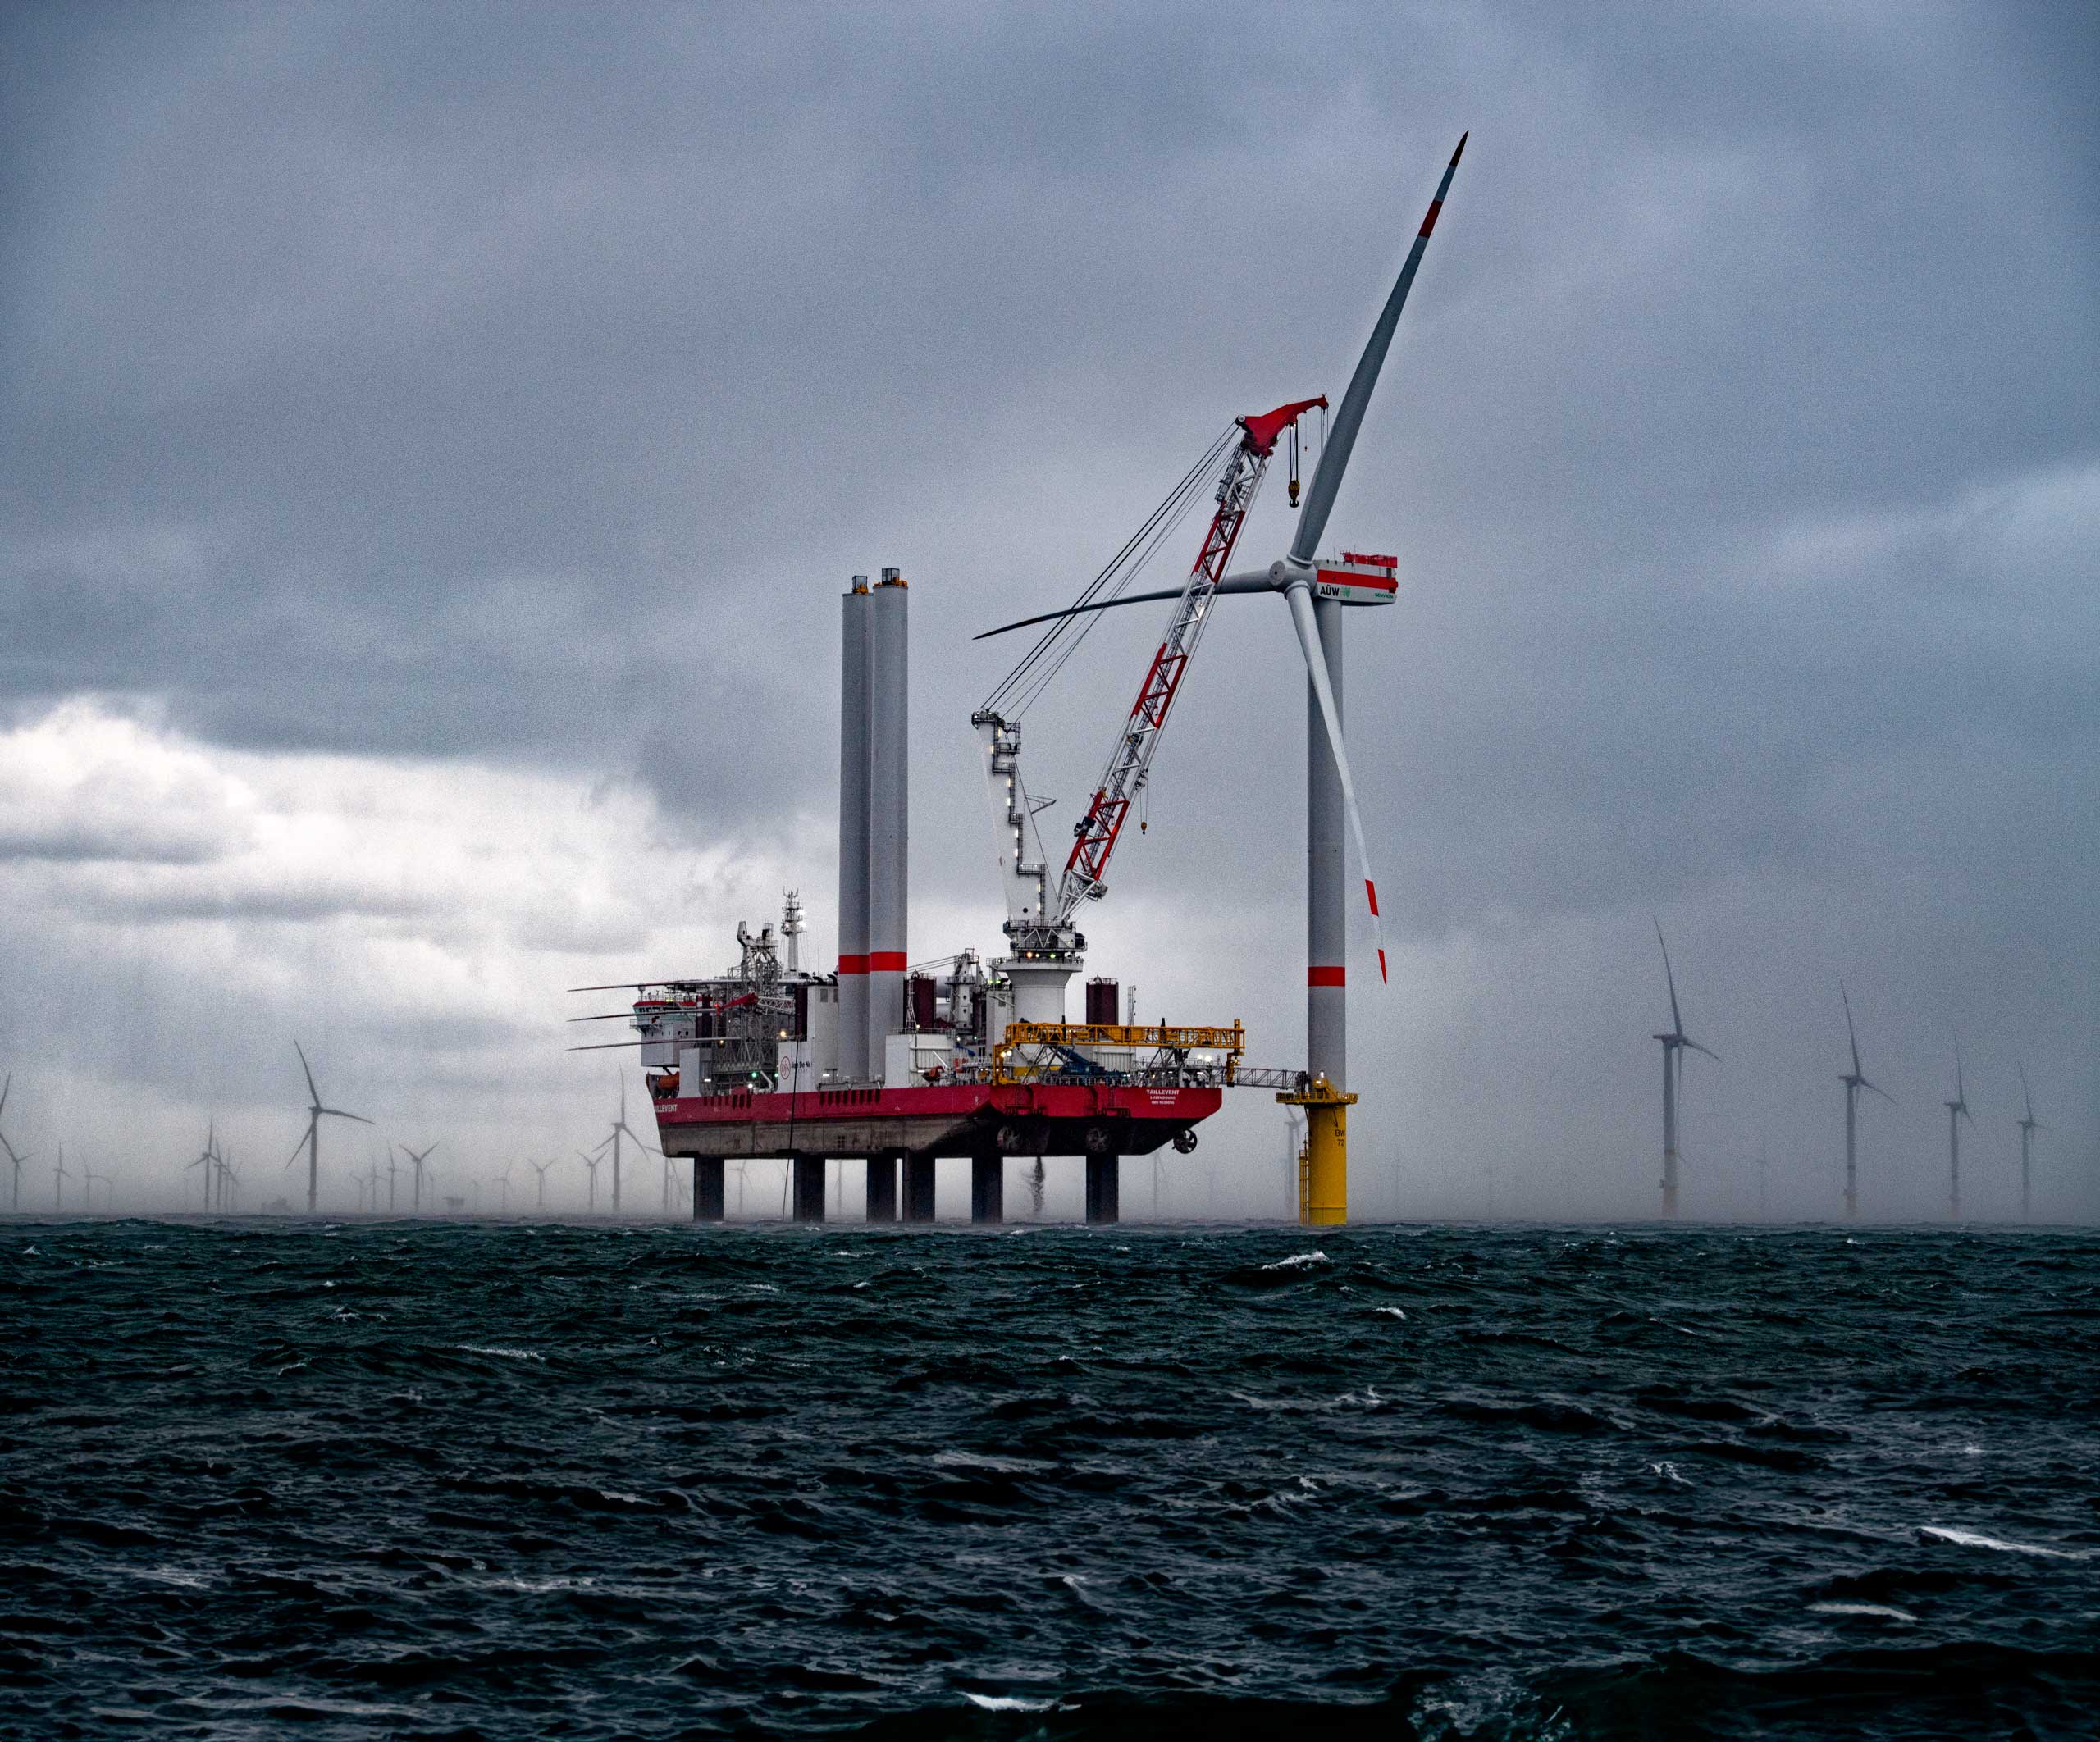 Offshore wind and its “exciting times”